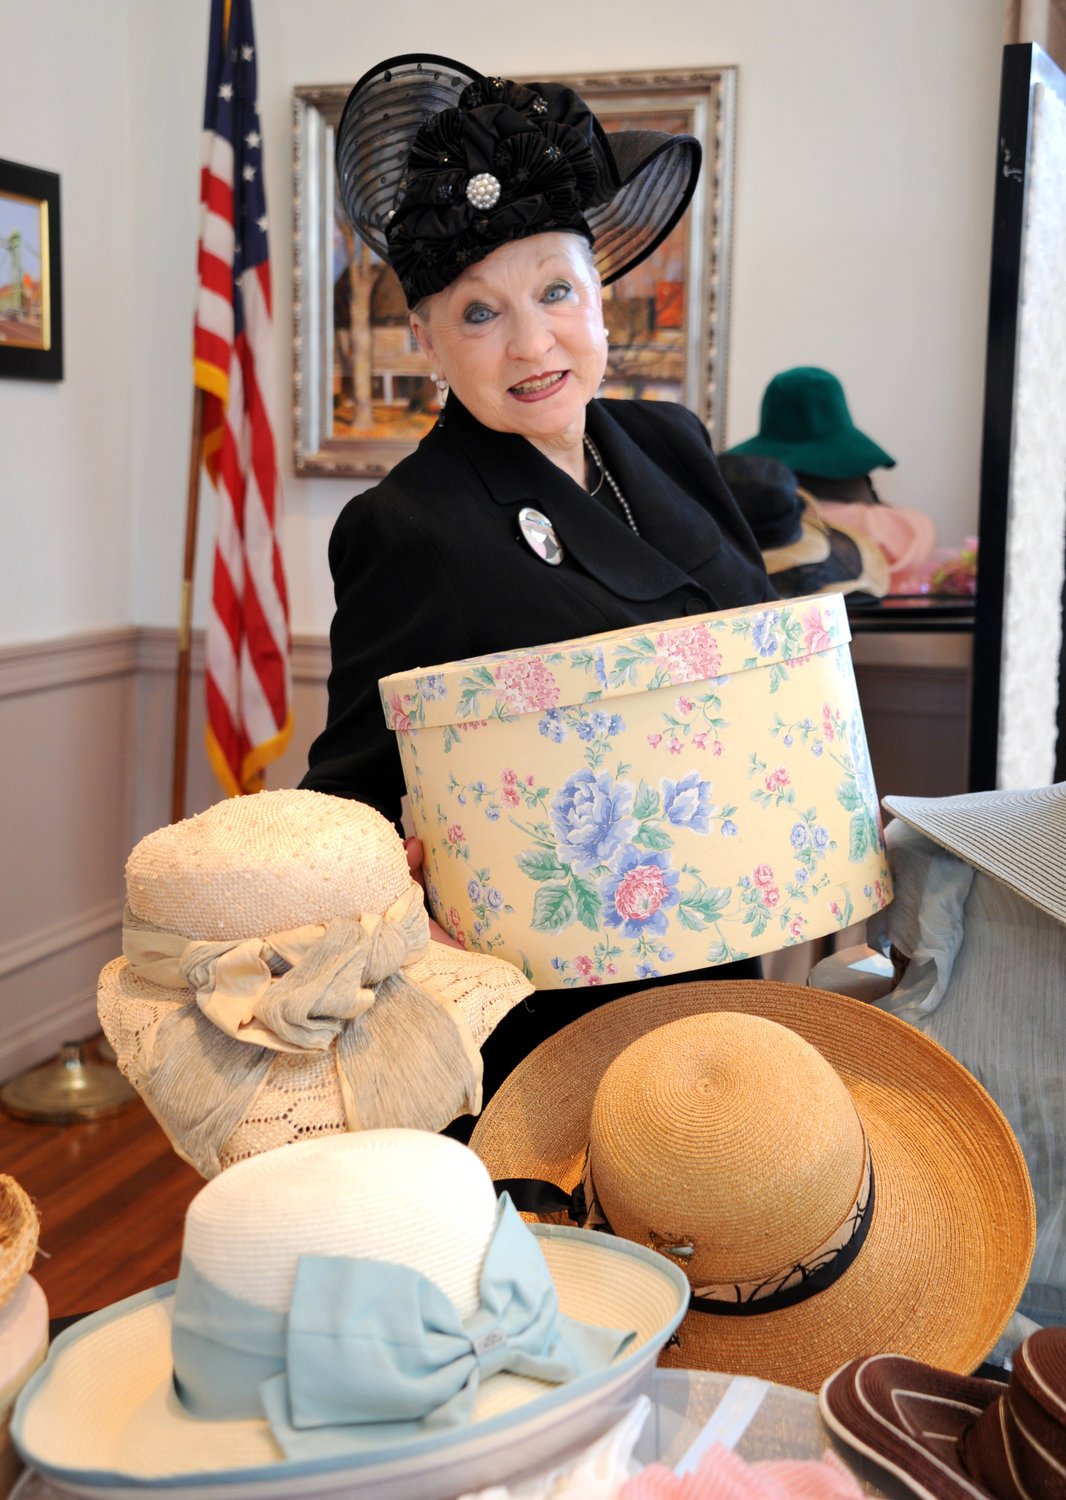 Lynne Anne Donchez stands amid her hat collection before she presented “The History of the 20th Century Through Hats” to the Bucks County Historical Society.